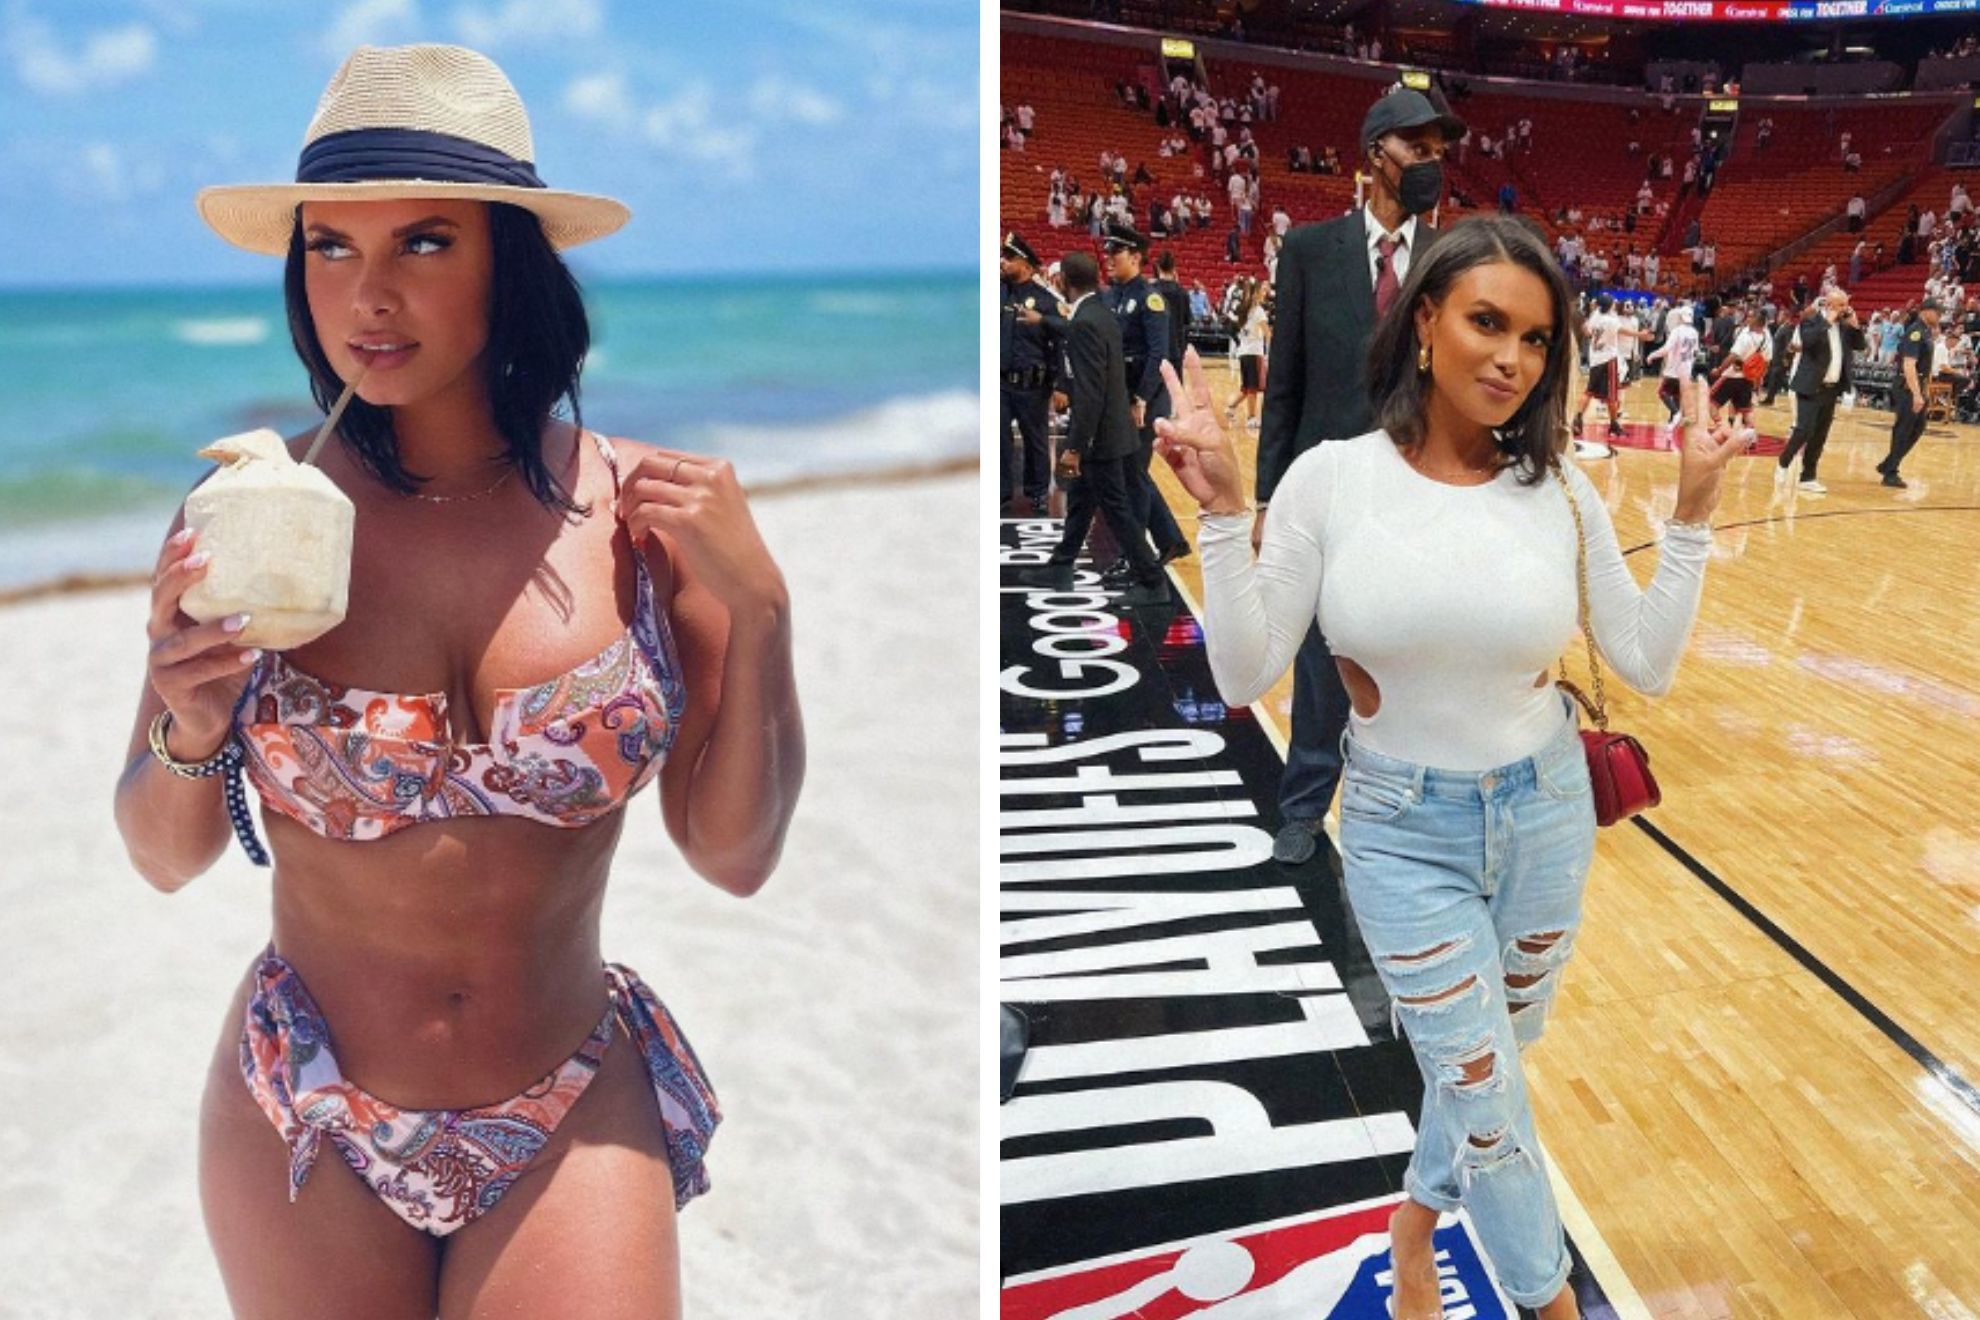 Who is Joy Taylor and why does she root for the Miami Heat?